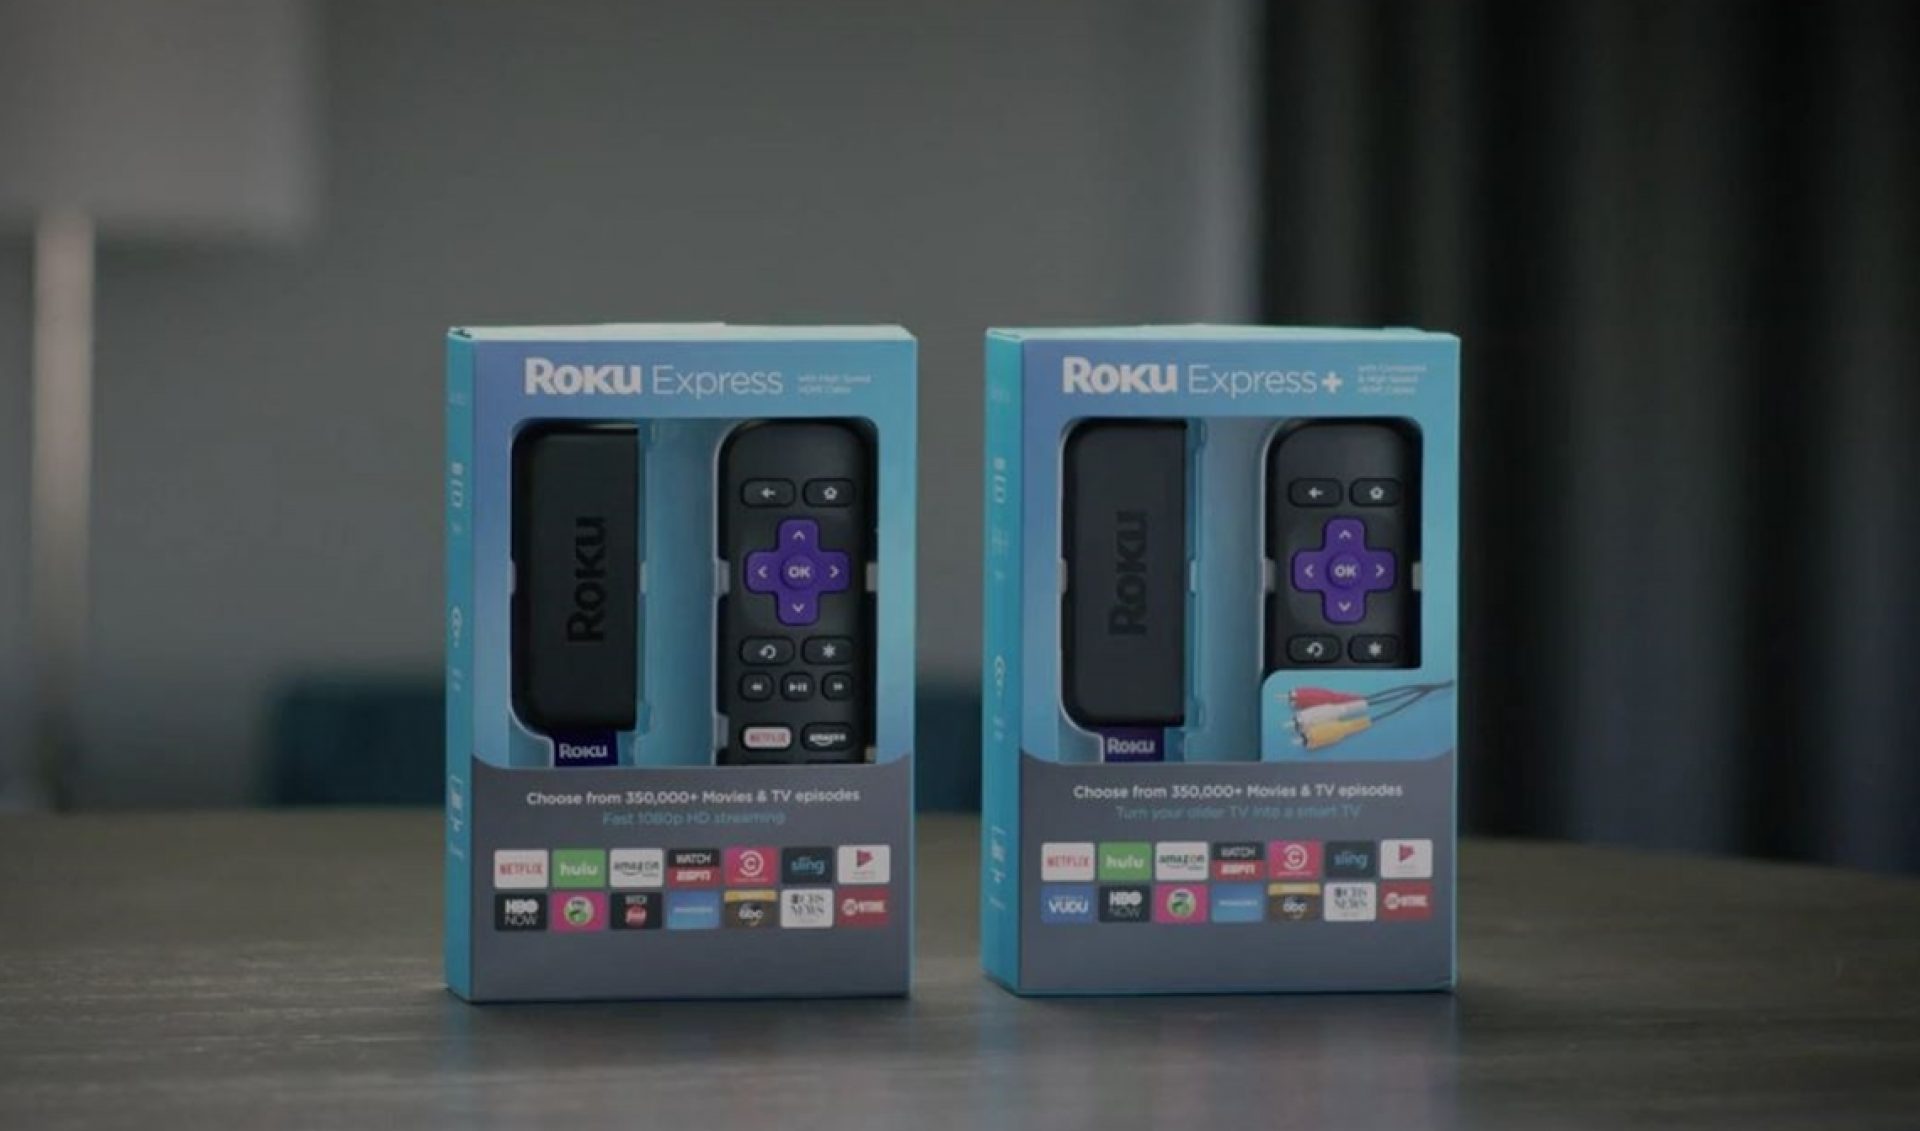 Sale Of Roku Devices Banned In Mexico Due To Rampant Hacking